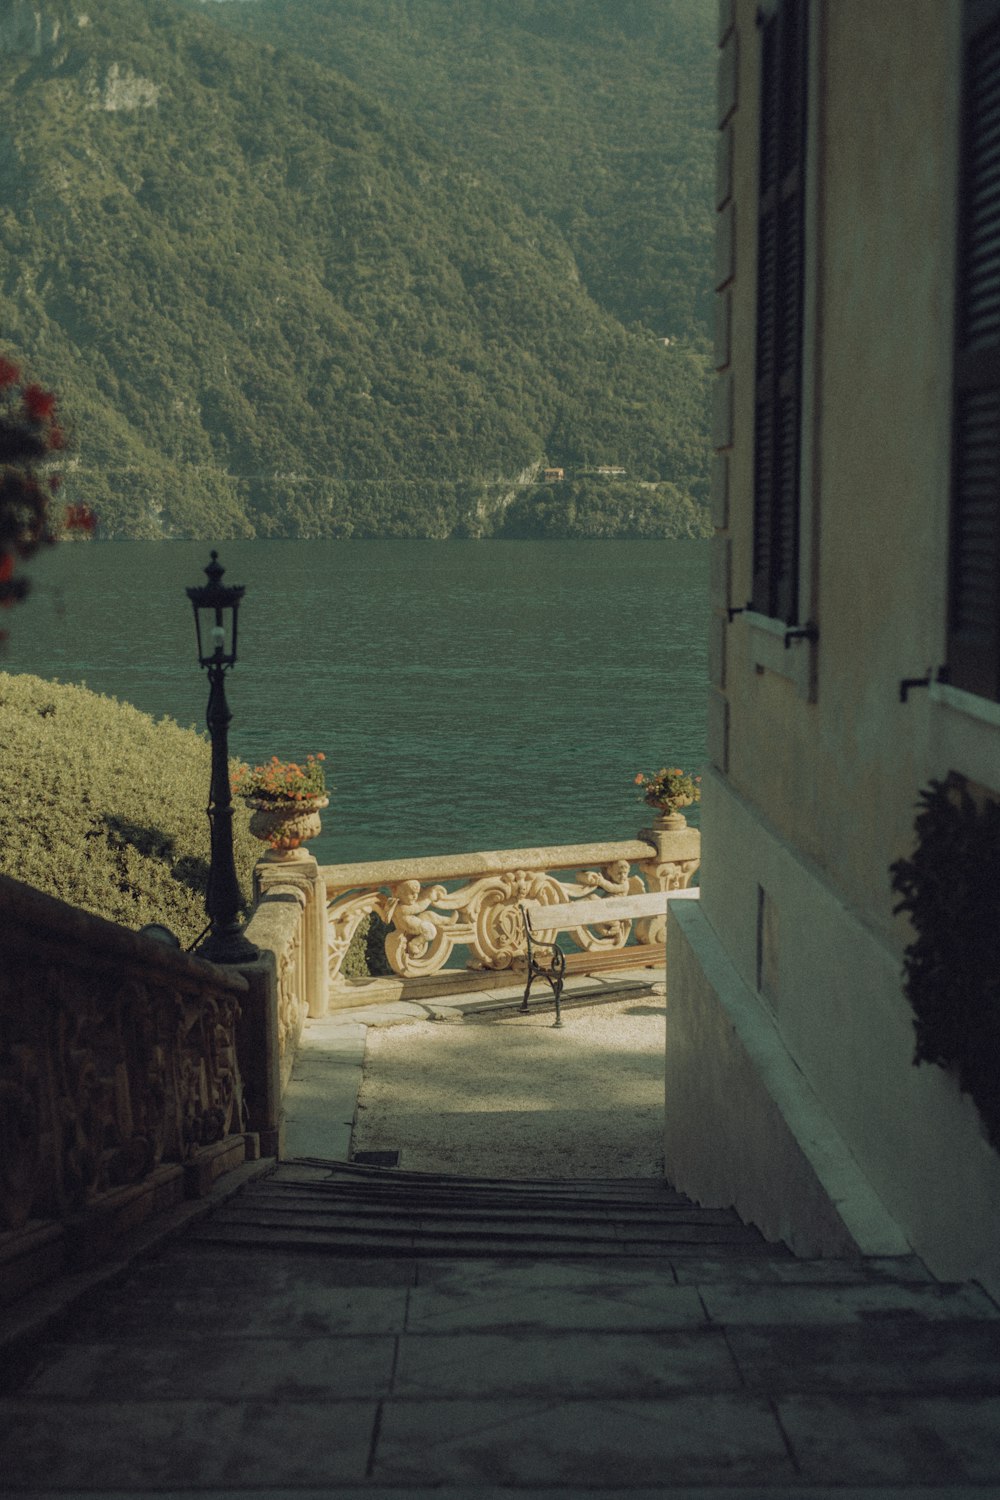 an open door leading to a balcony overlooking a body of water